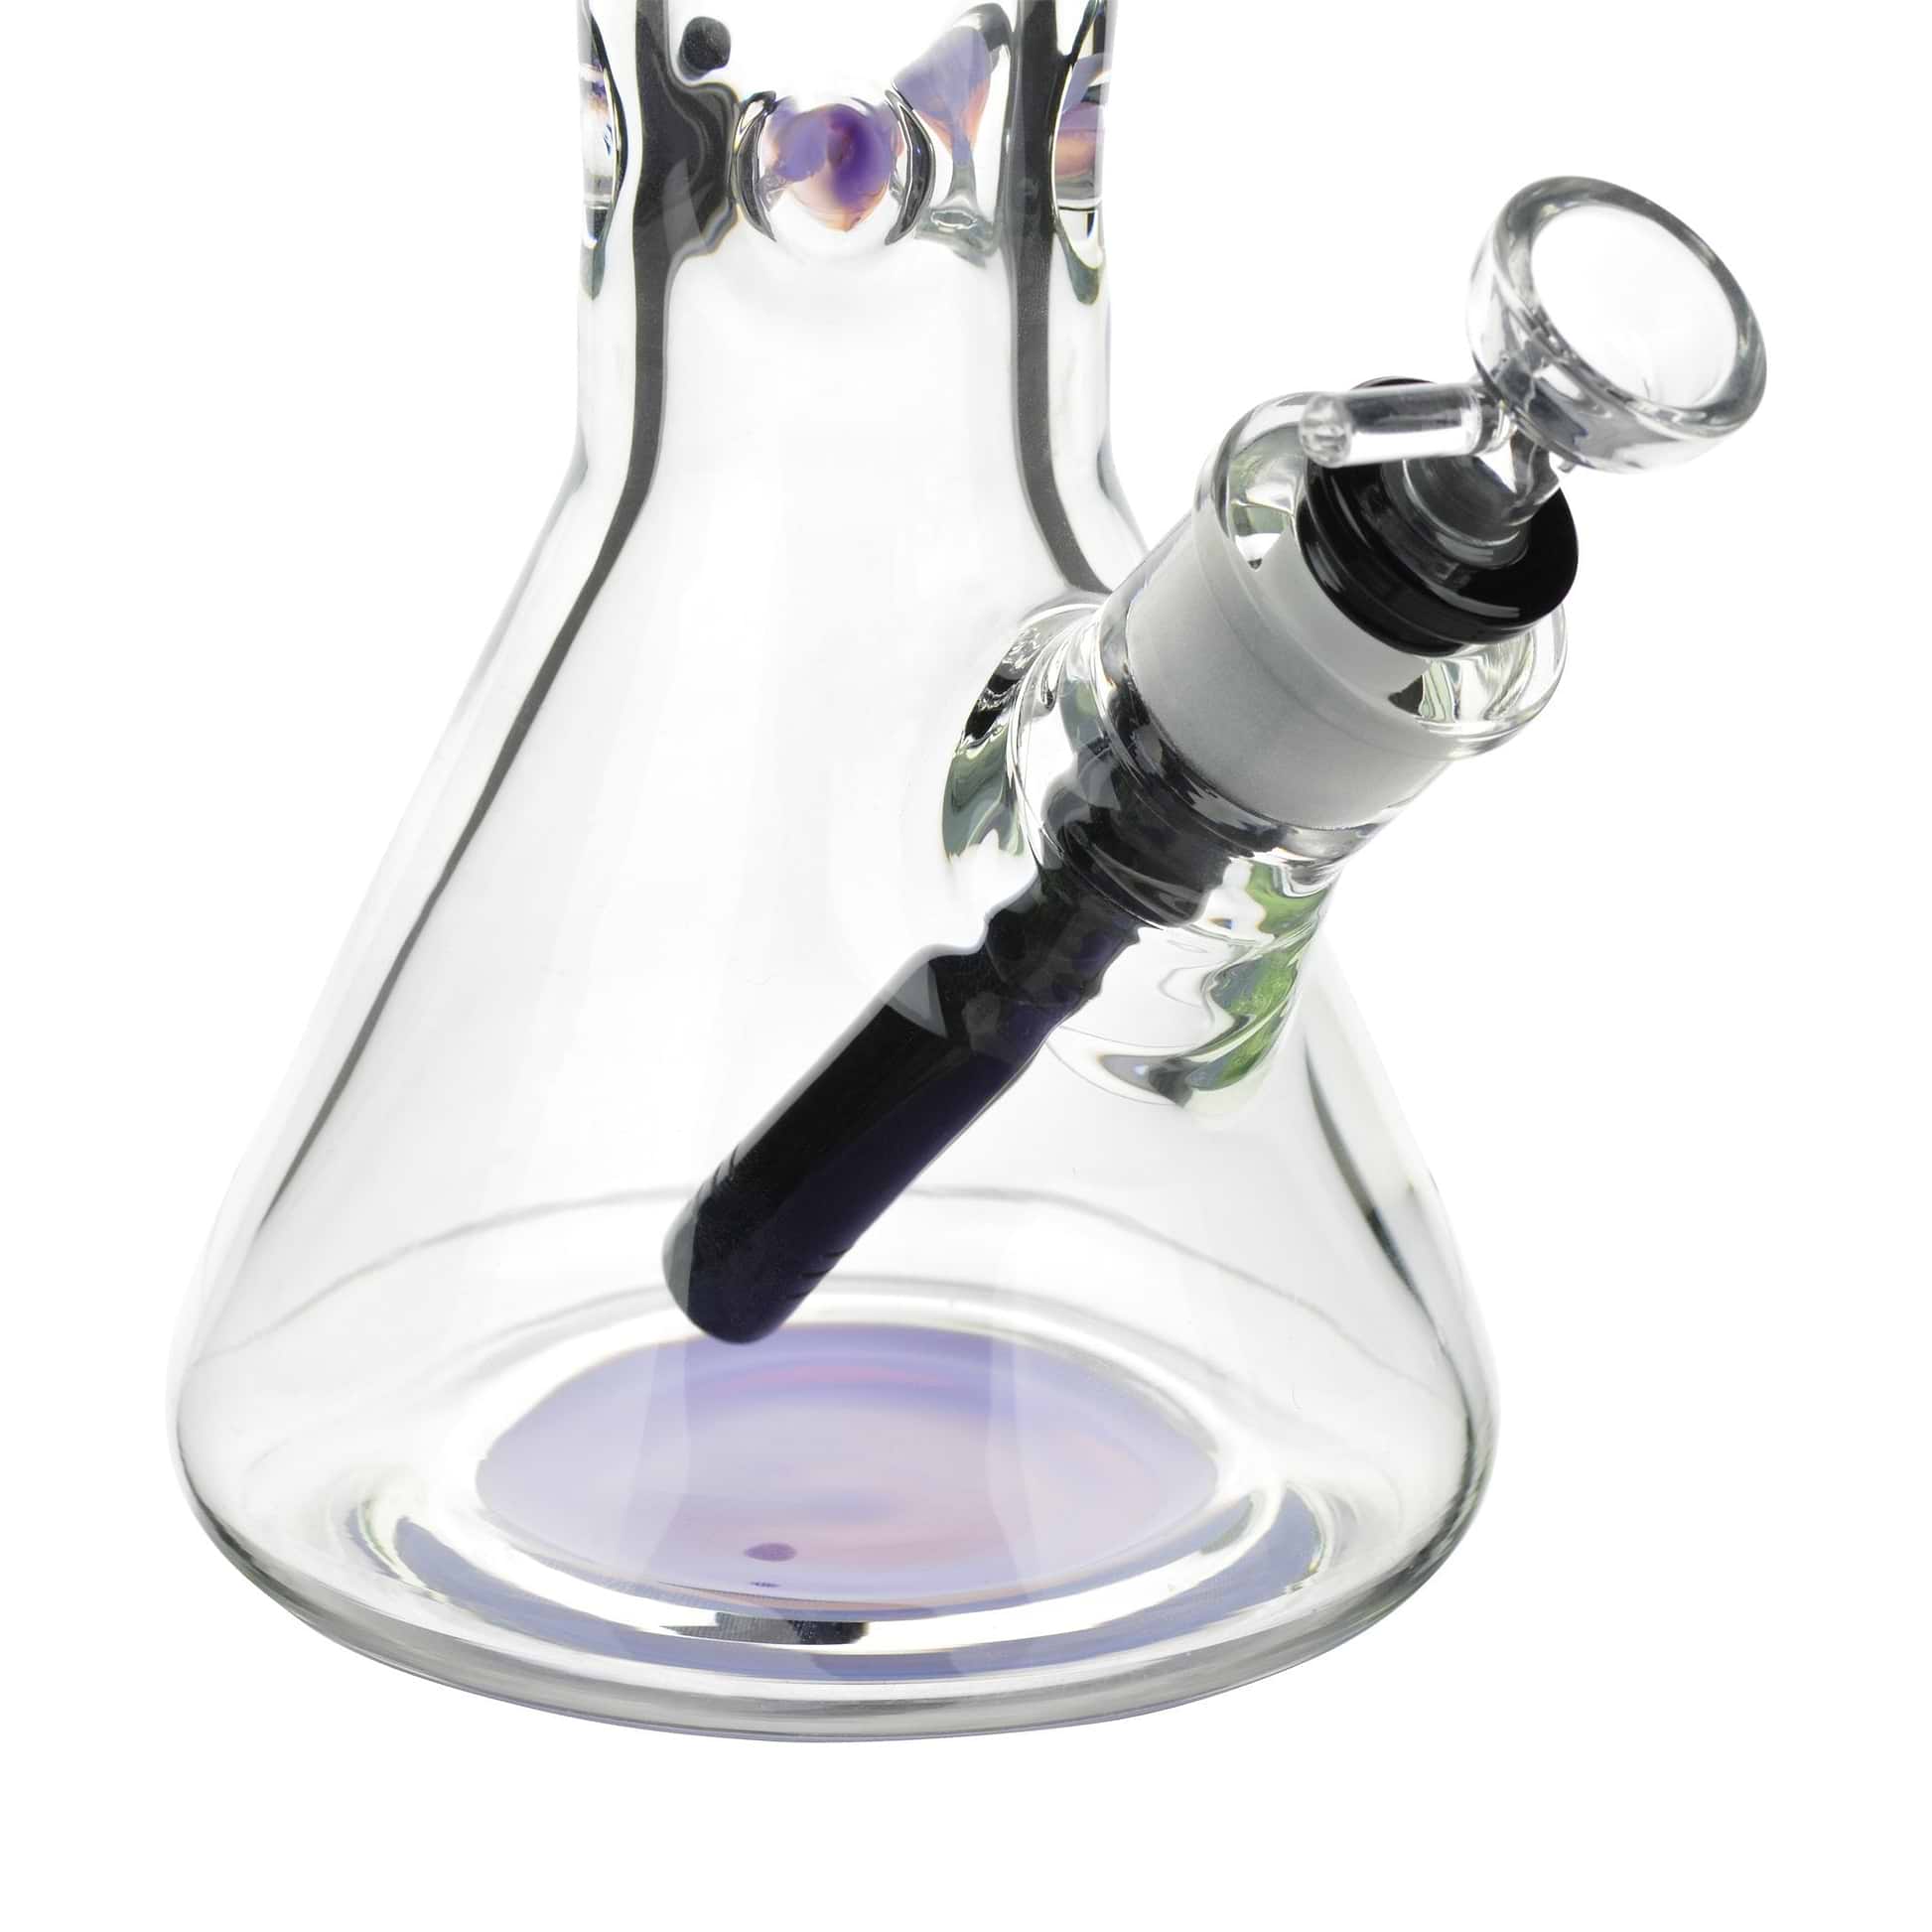 12-inch glass beaker bong smoking device with built-in splashguards and sturdy base and elegant purple mouthpiece color